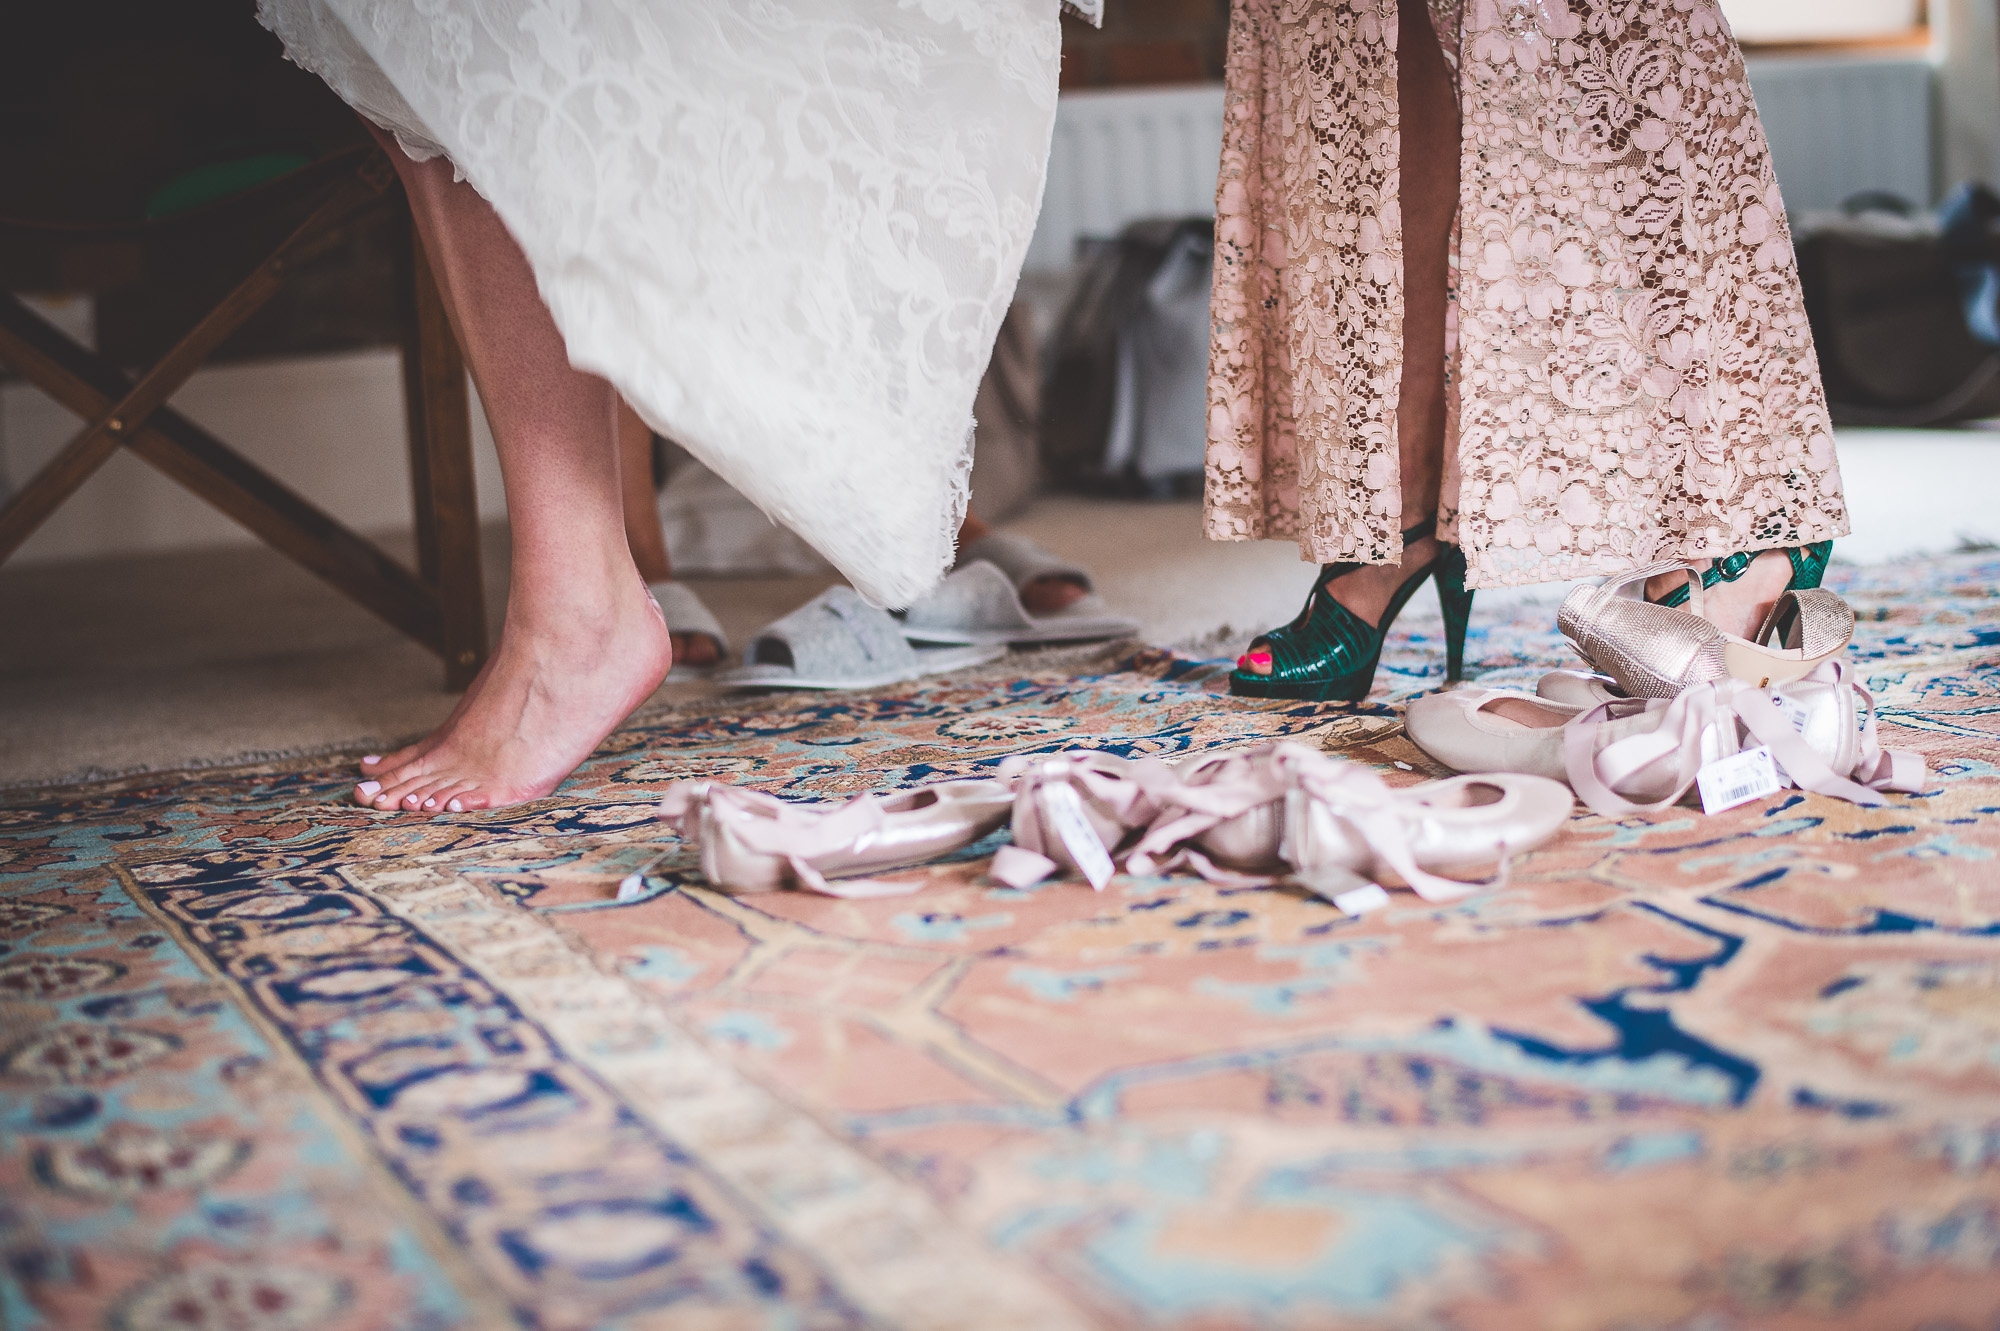 A bride and her bridesmaids posing for a wedding photo on a rug.